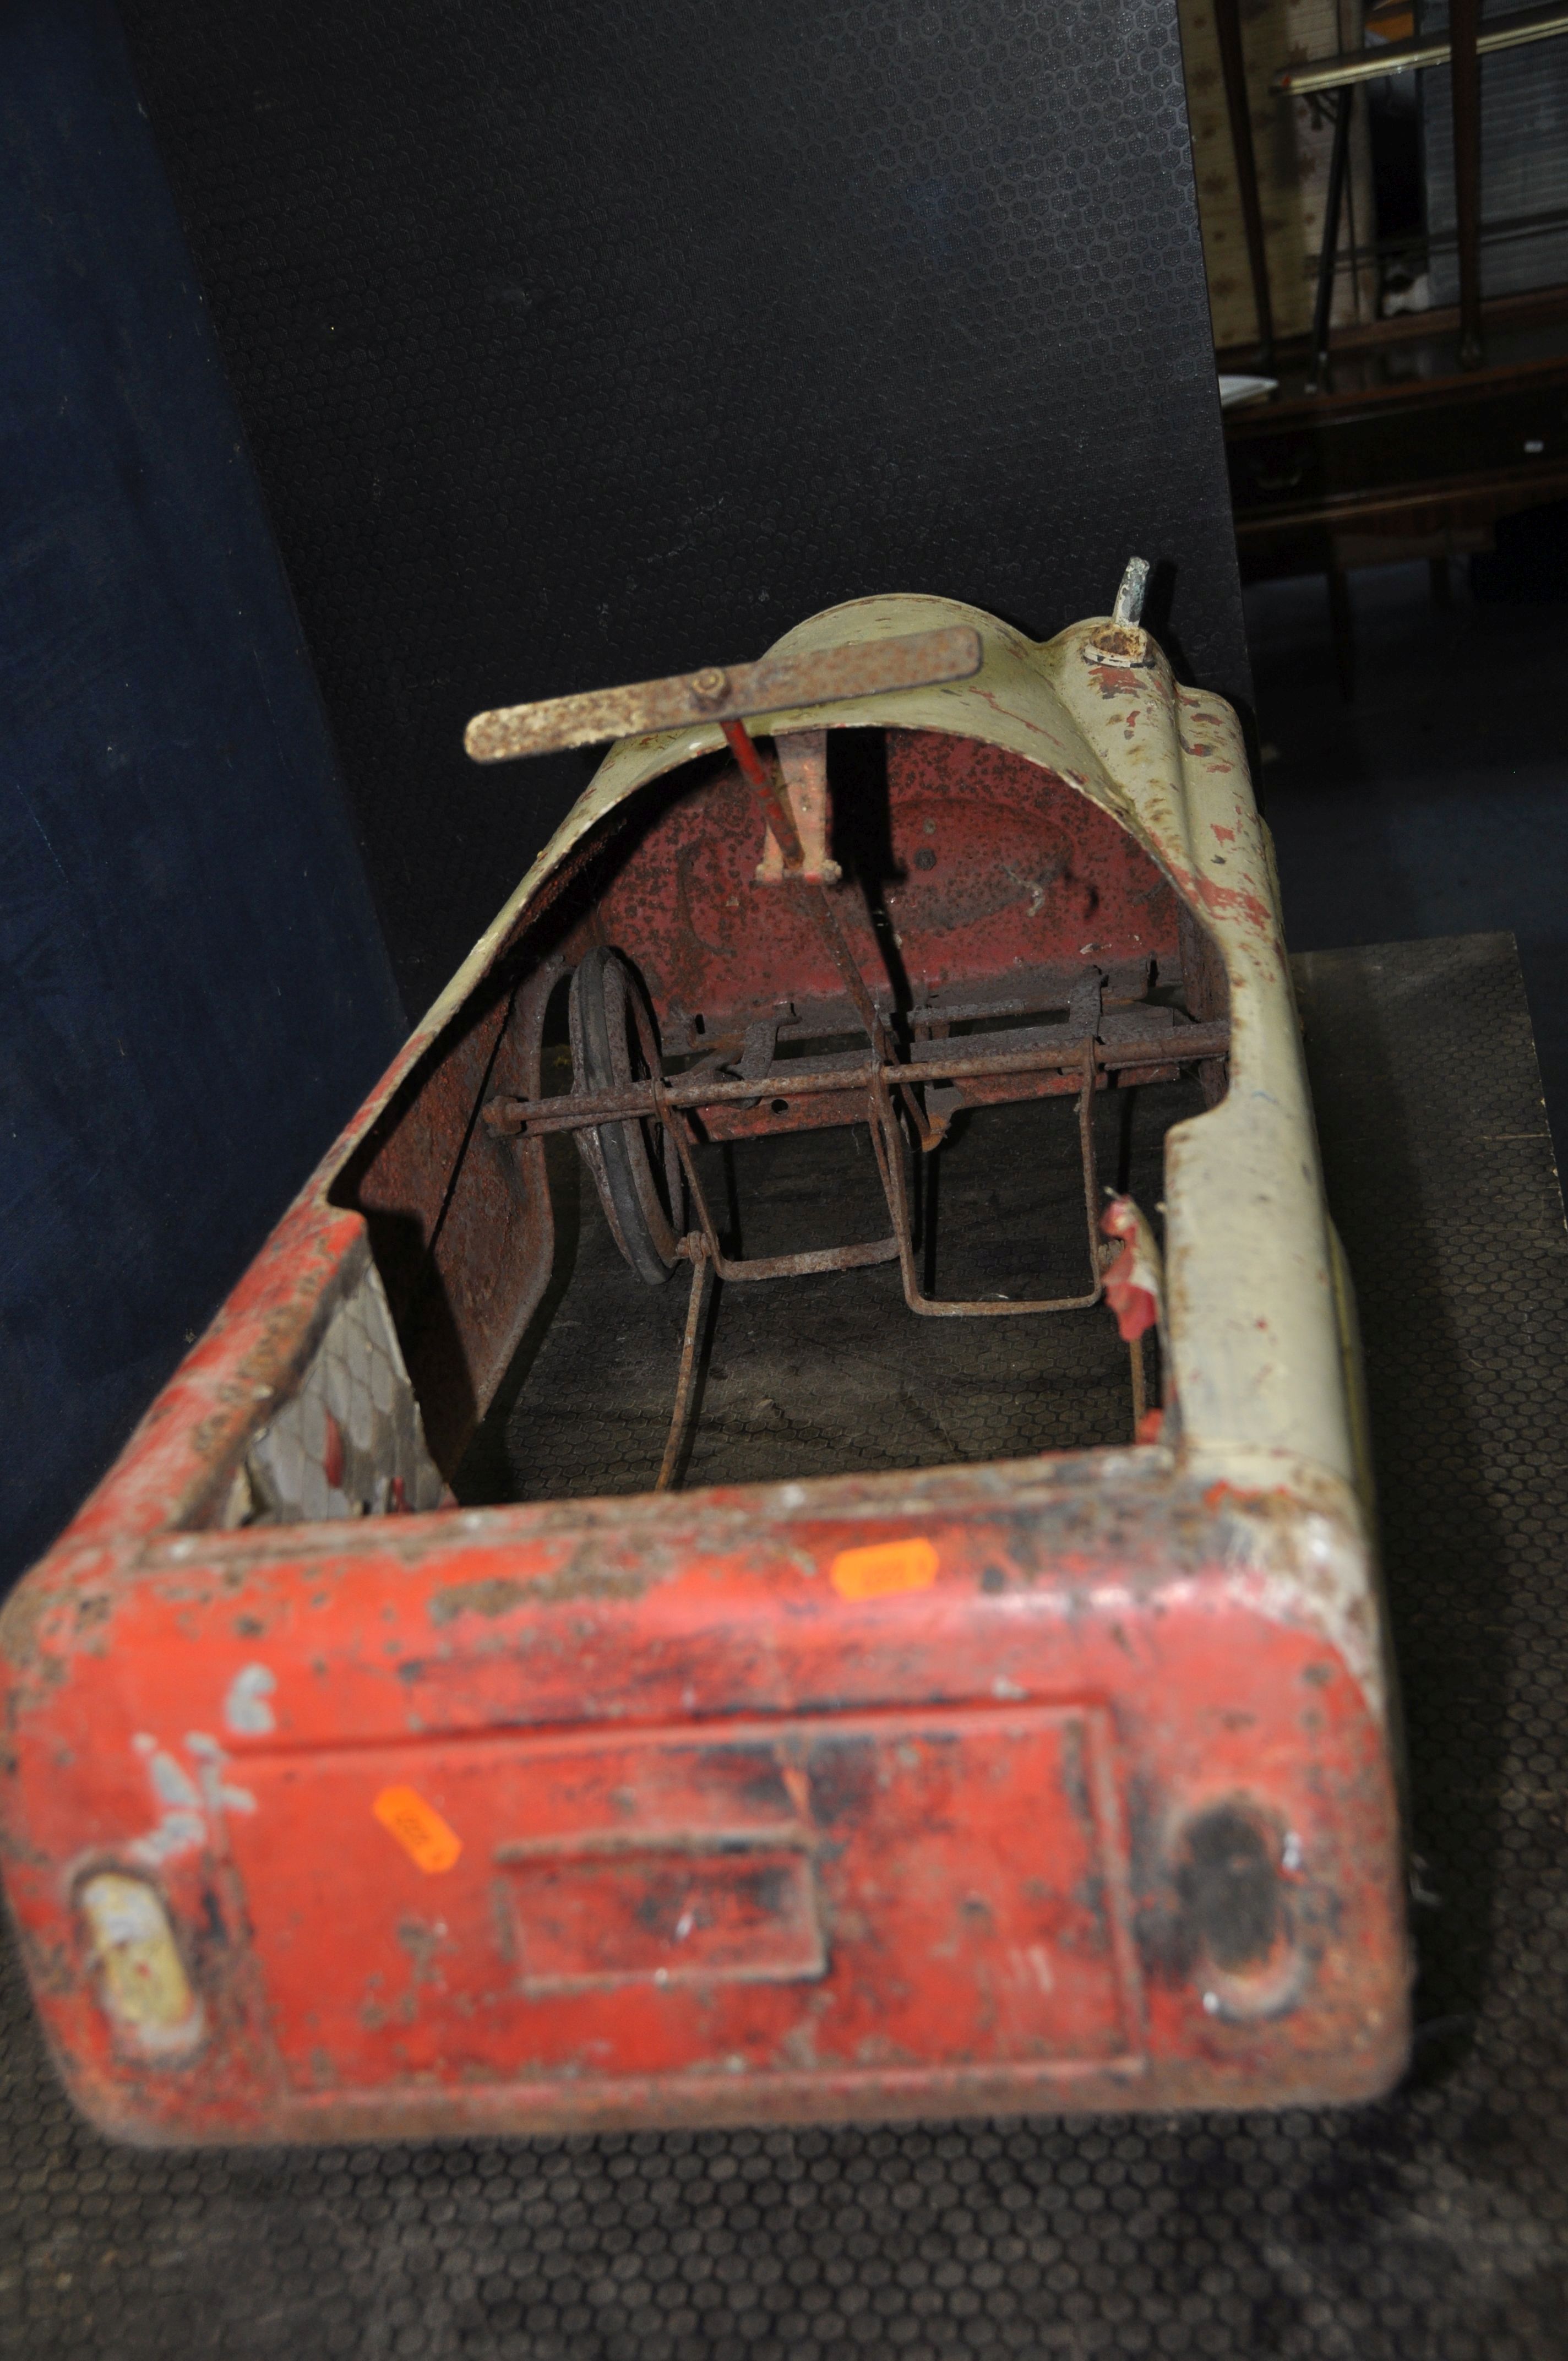 A 1950'S CHILDS TIN PLATE PEDAL CAR with distressed paint finish, total length 36in (Condition - Image 3 of 3